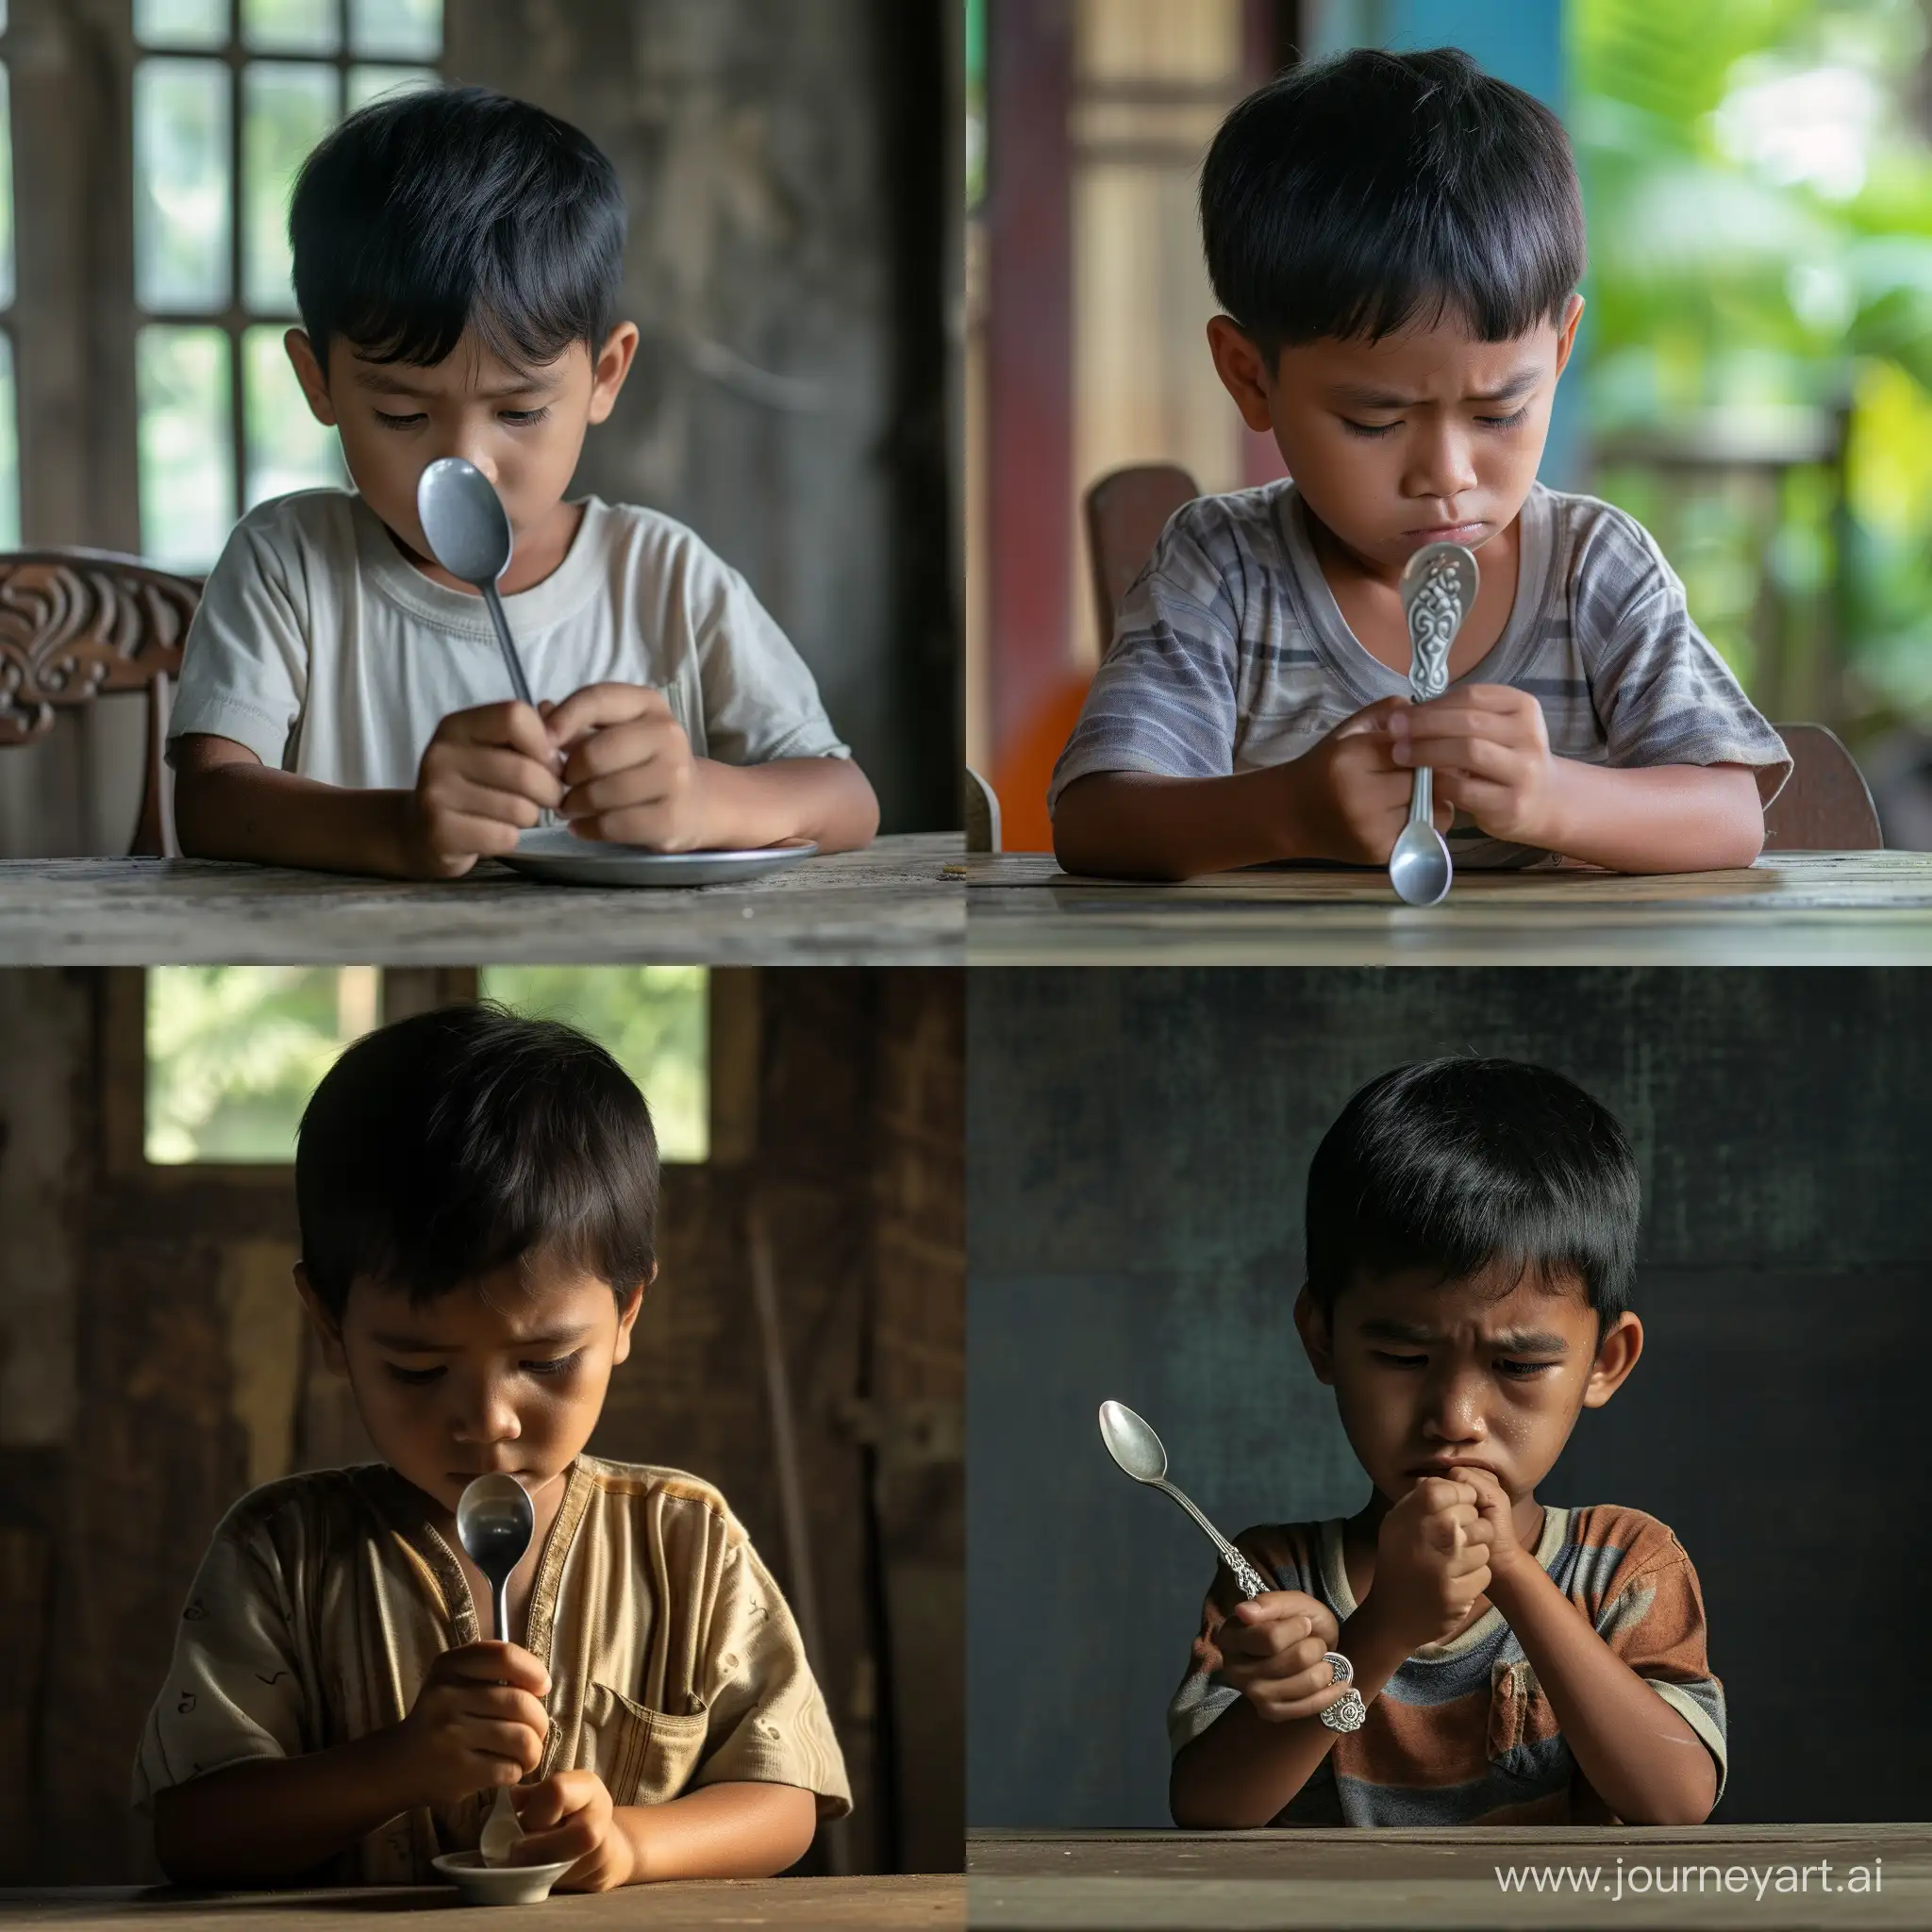 A 5 year old indonesian boy was holding a spoon, looking gloomy looking down sadly and had no appetite at a simple dining table. Movie scene, left side view